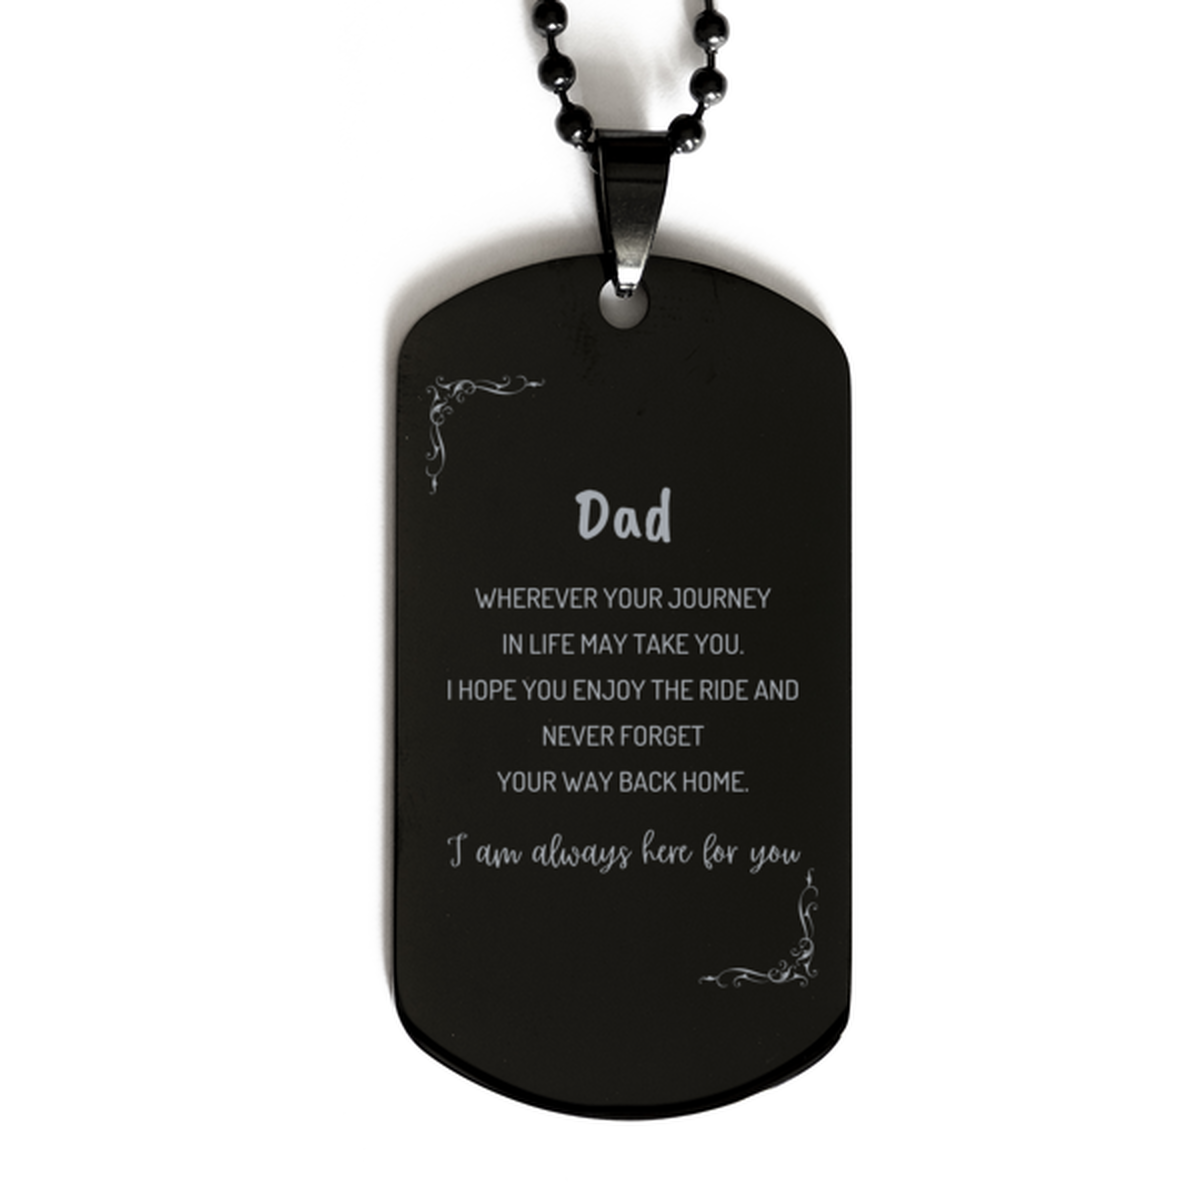 Dad wherever your journey in life may take you, I am always here for you Dad Black Dog Tag, Awesome Christmas Gifts For Dad, Dad Birthday Gifts for Men Women Family Loved One